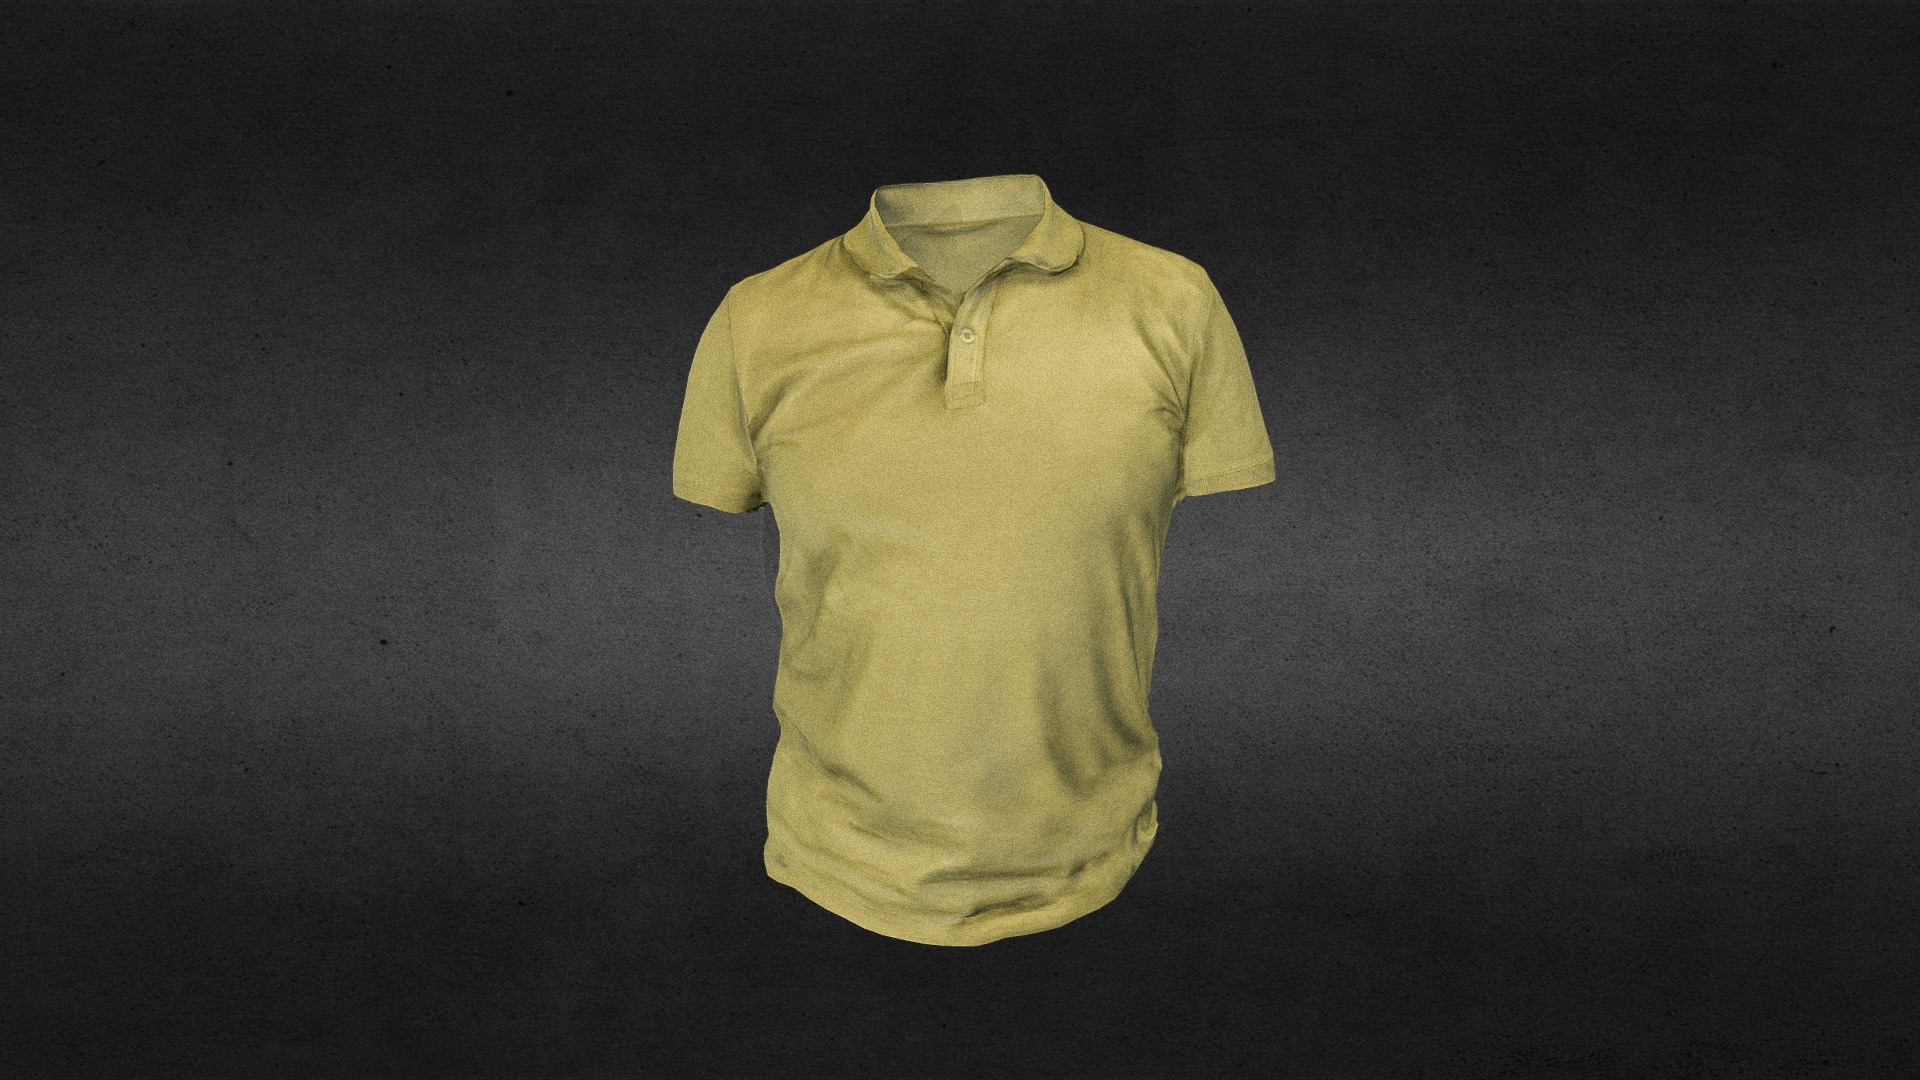 3D model T-shirt low poly - This is a 3D model of the T-shirt low poly. The 3D model is about a yellow shirt on a black surface.